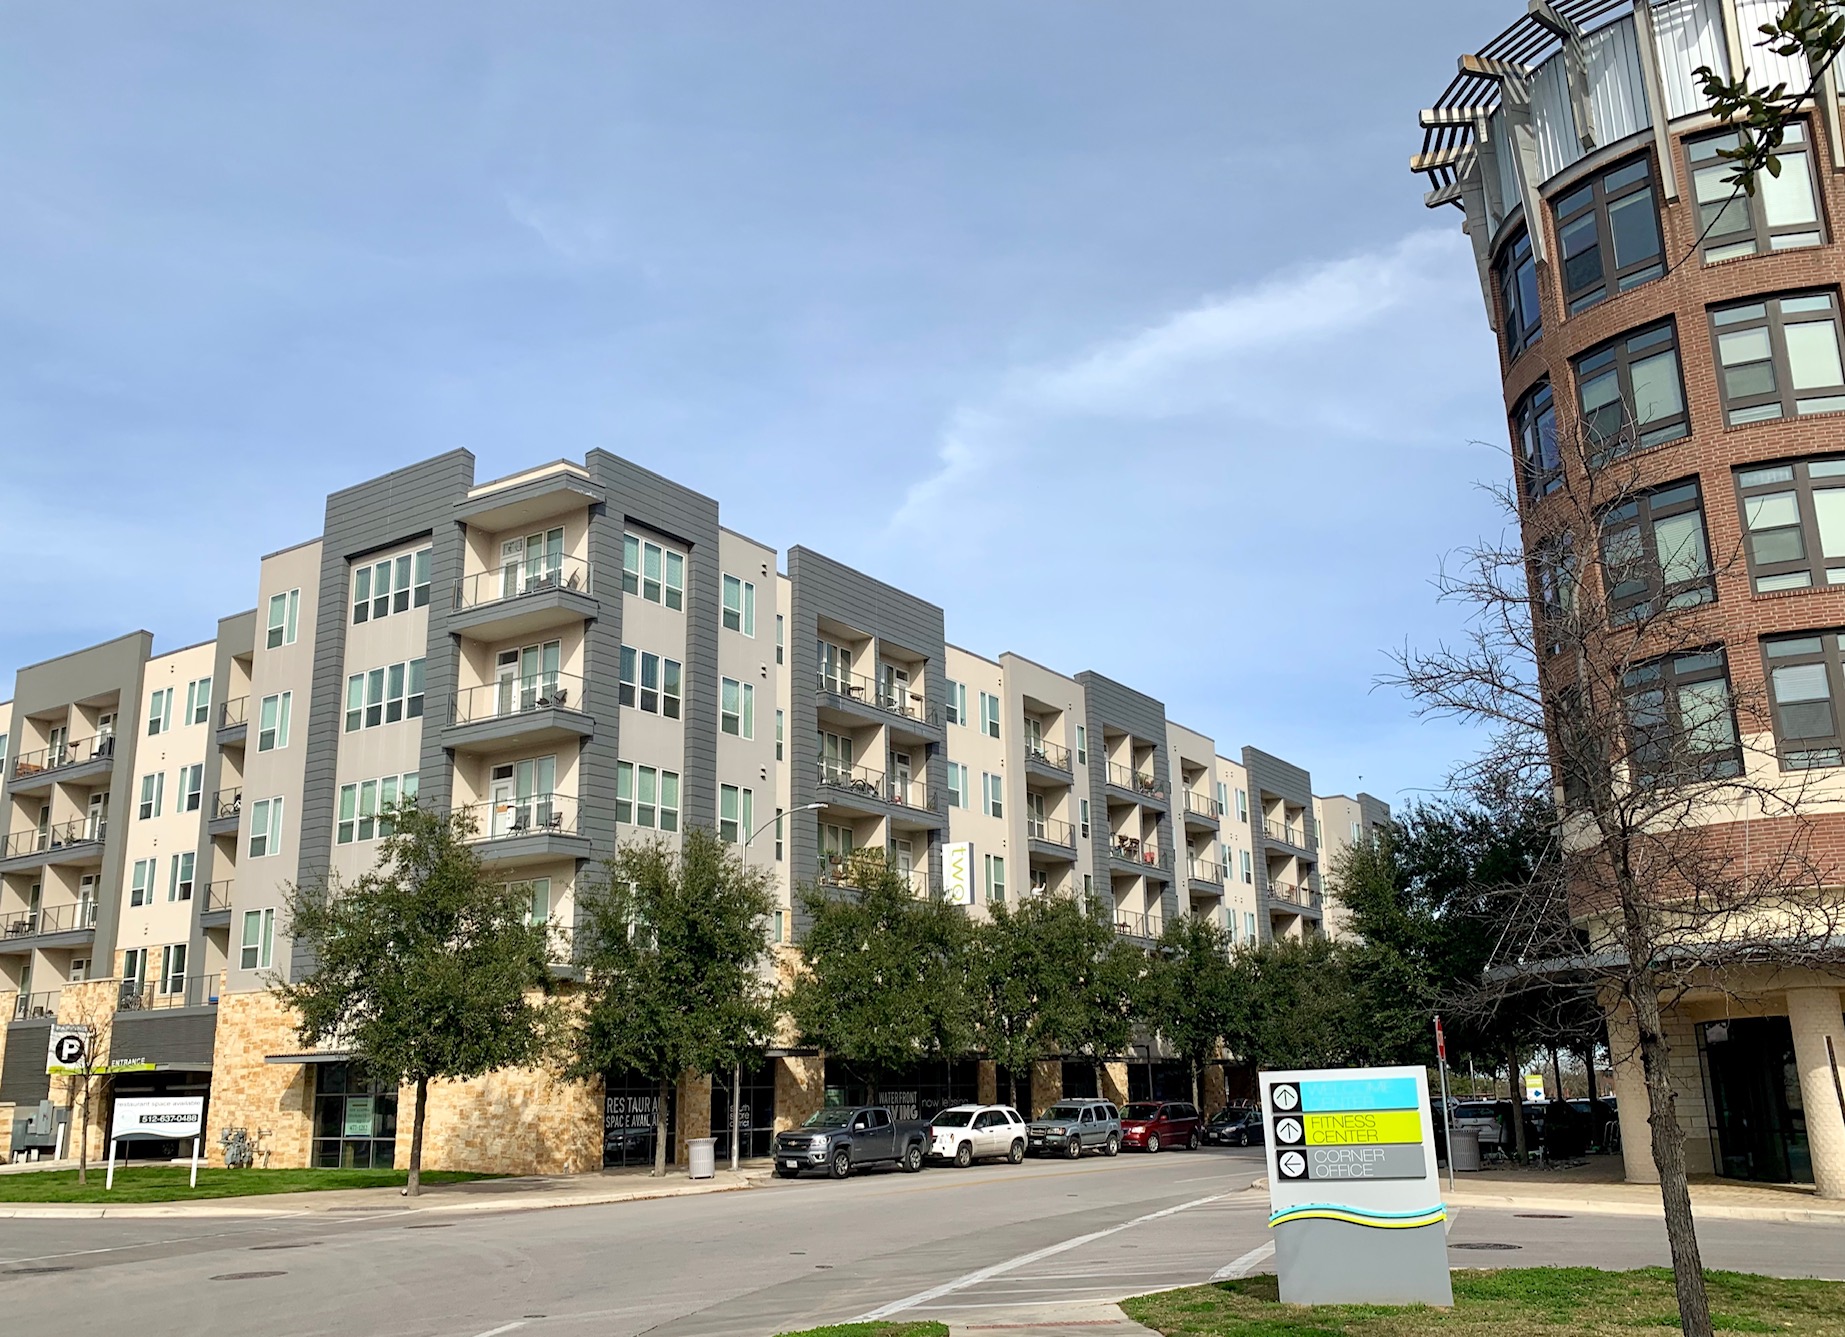 5-over-1 style apartment buildings in Austin, Texas By Sk5893